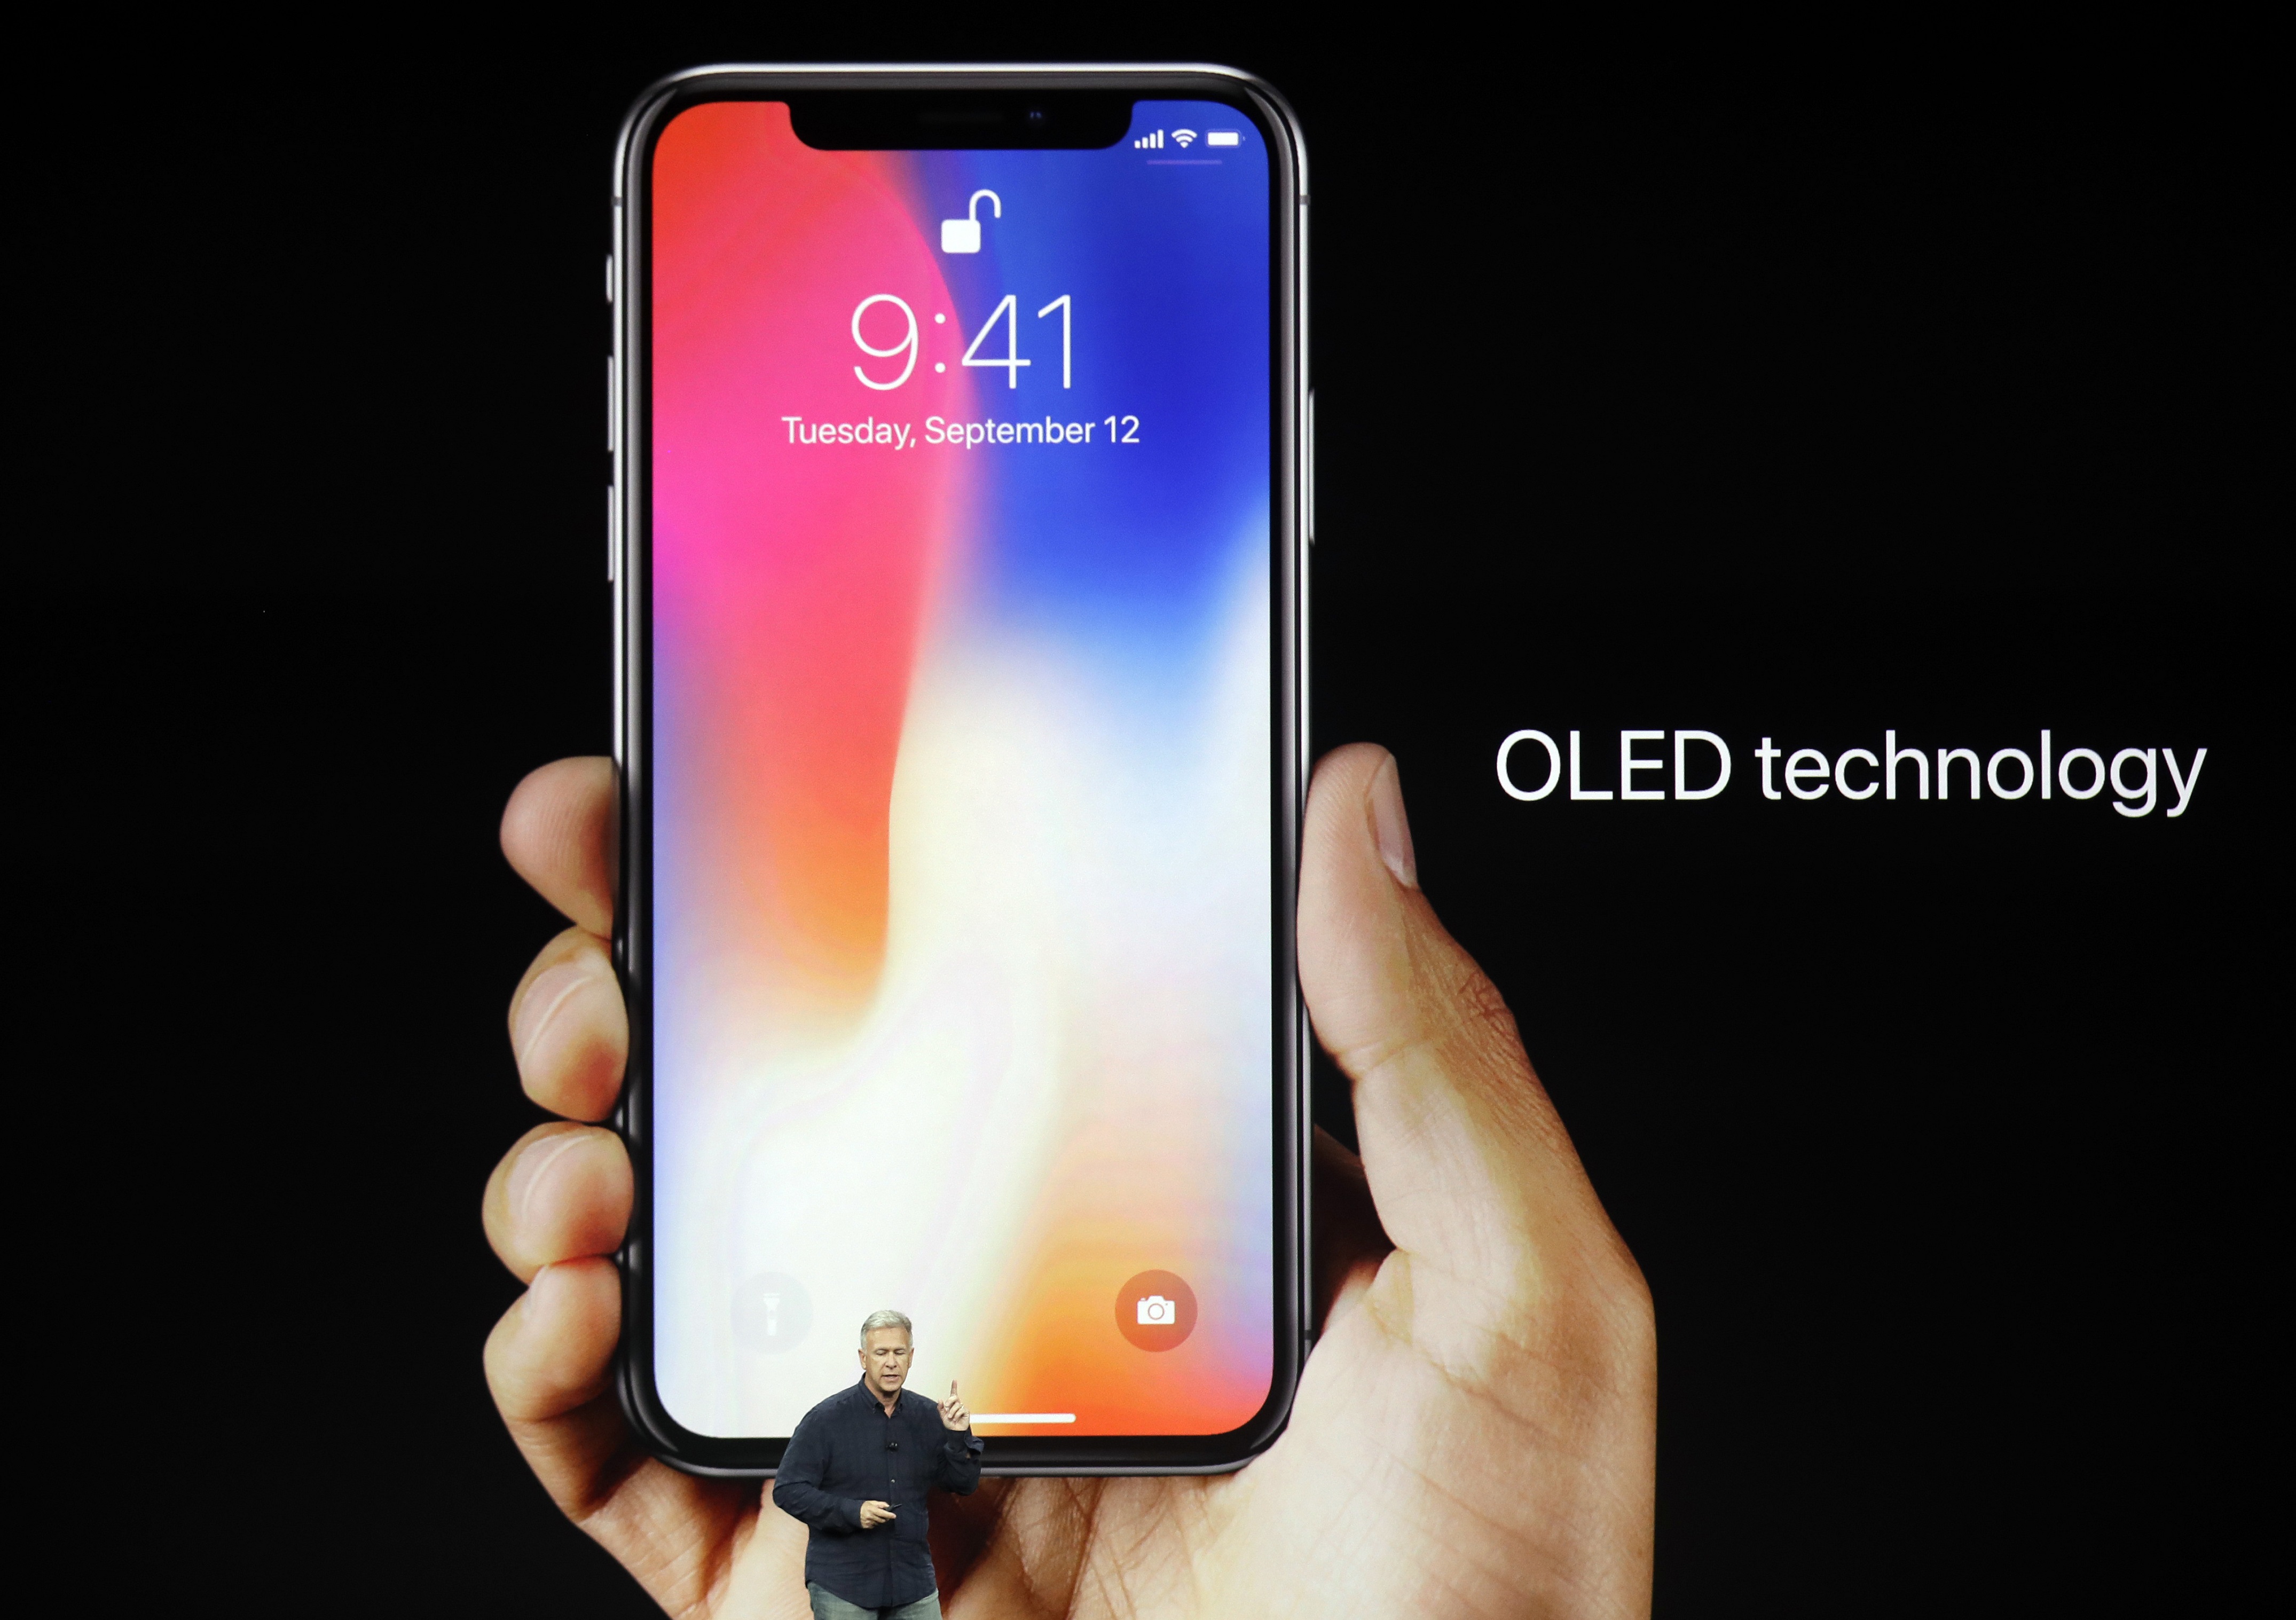 The iPhone X in someone's hand behind Schiller